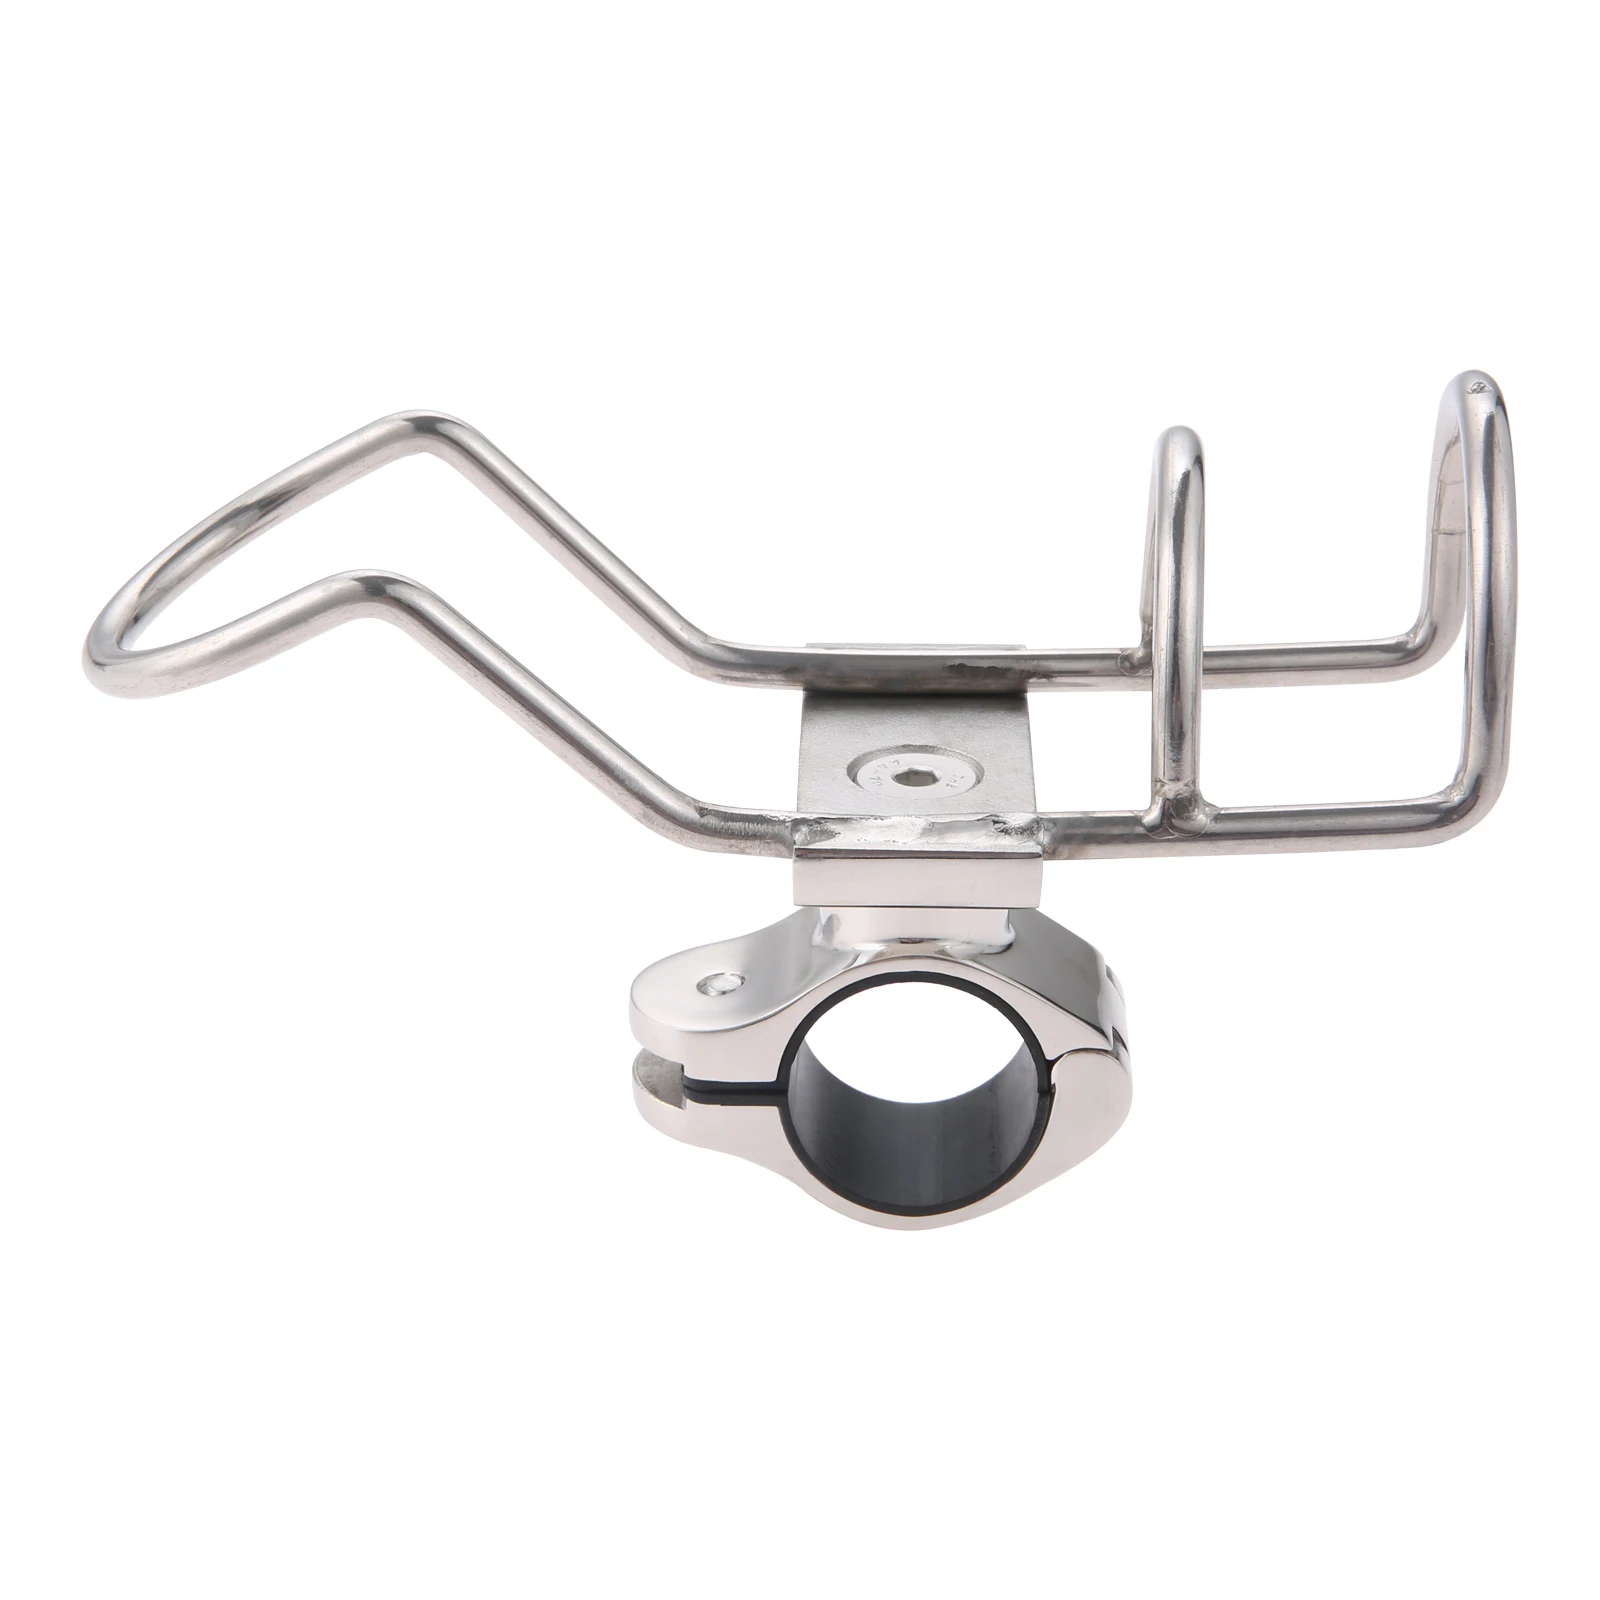 Eye Hooks Boat Accessories Marine Fishing Tools Boat Stainless Steel  Fishing Rod Holder Clamp-on with Wrench and Gasket Hooks with Screws (Color  : 1